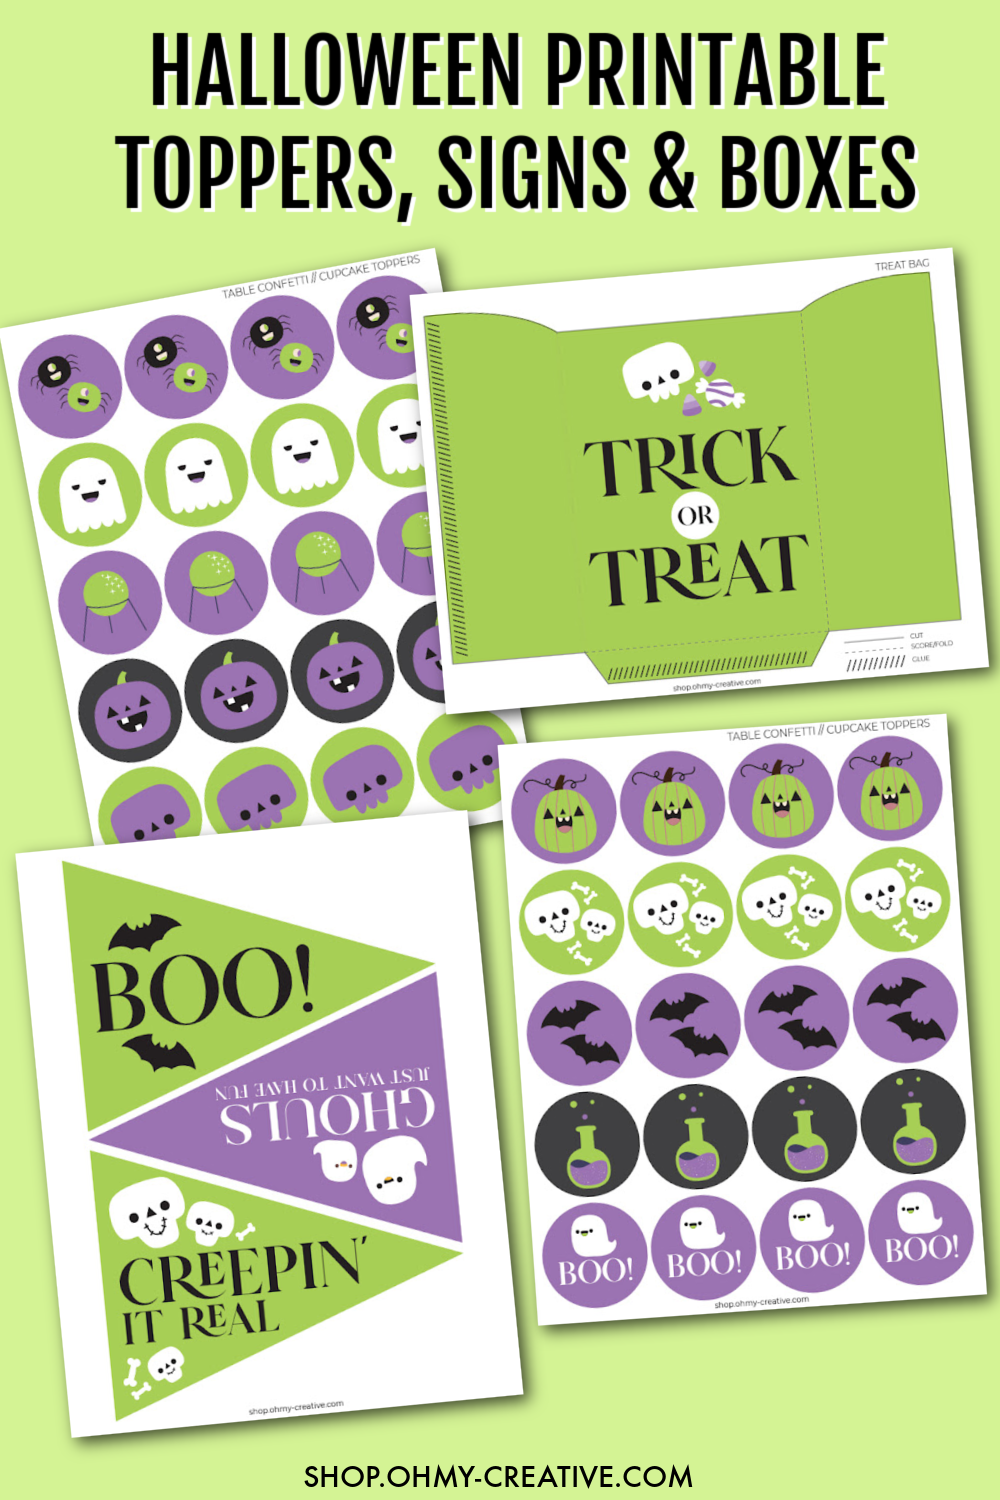 Halloween printable decoration pages, signs and treat toppers in green and purple with cute skulls, bats, beakers, ghosts and pumpkins.